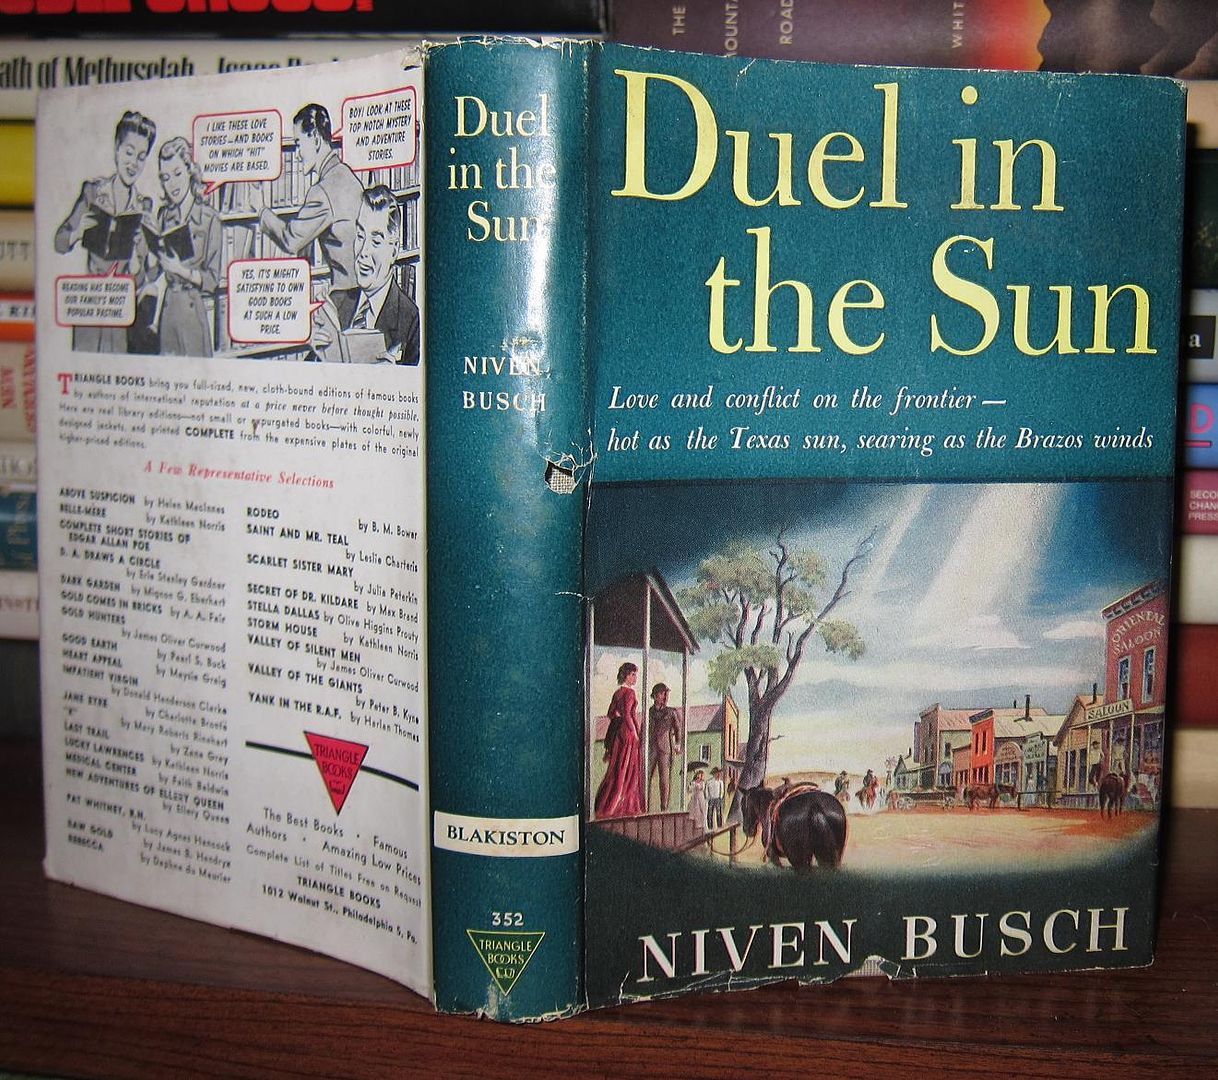 BUSCH, NIVEN - Duel in the Sun